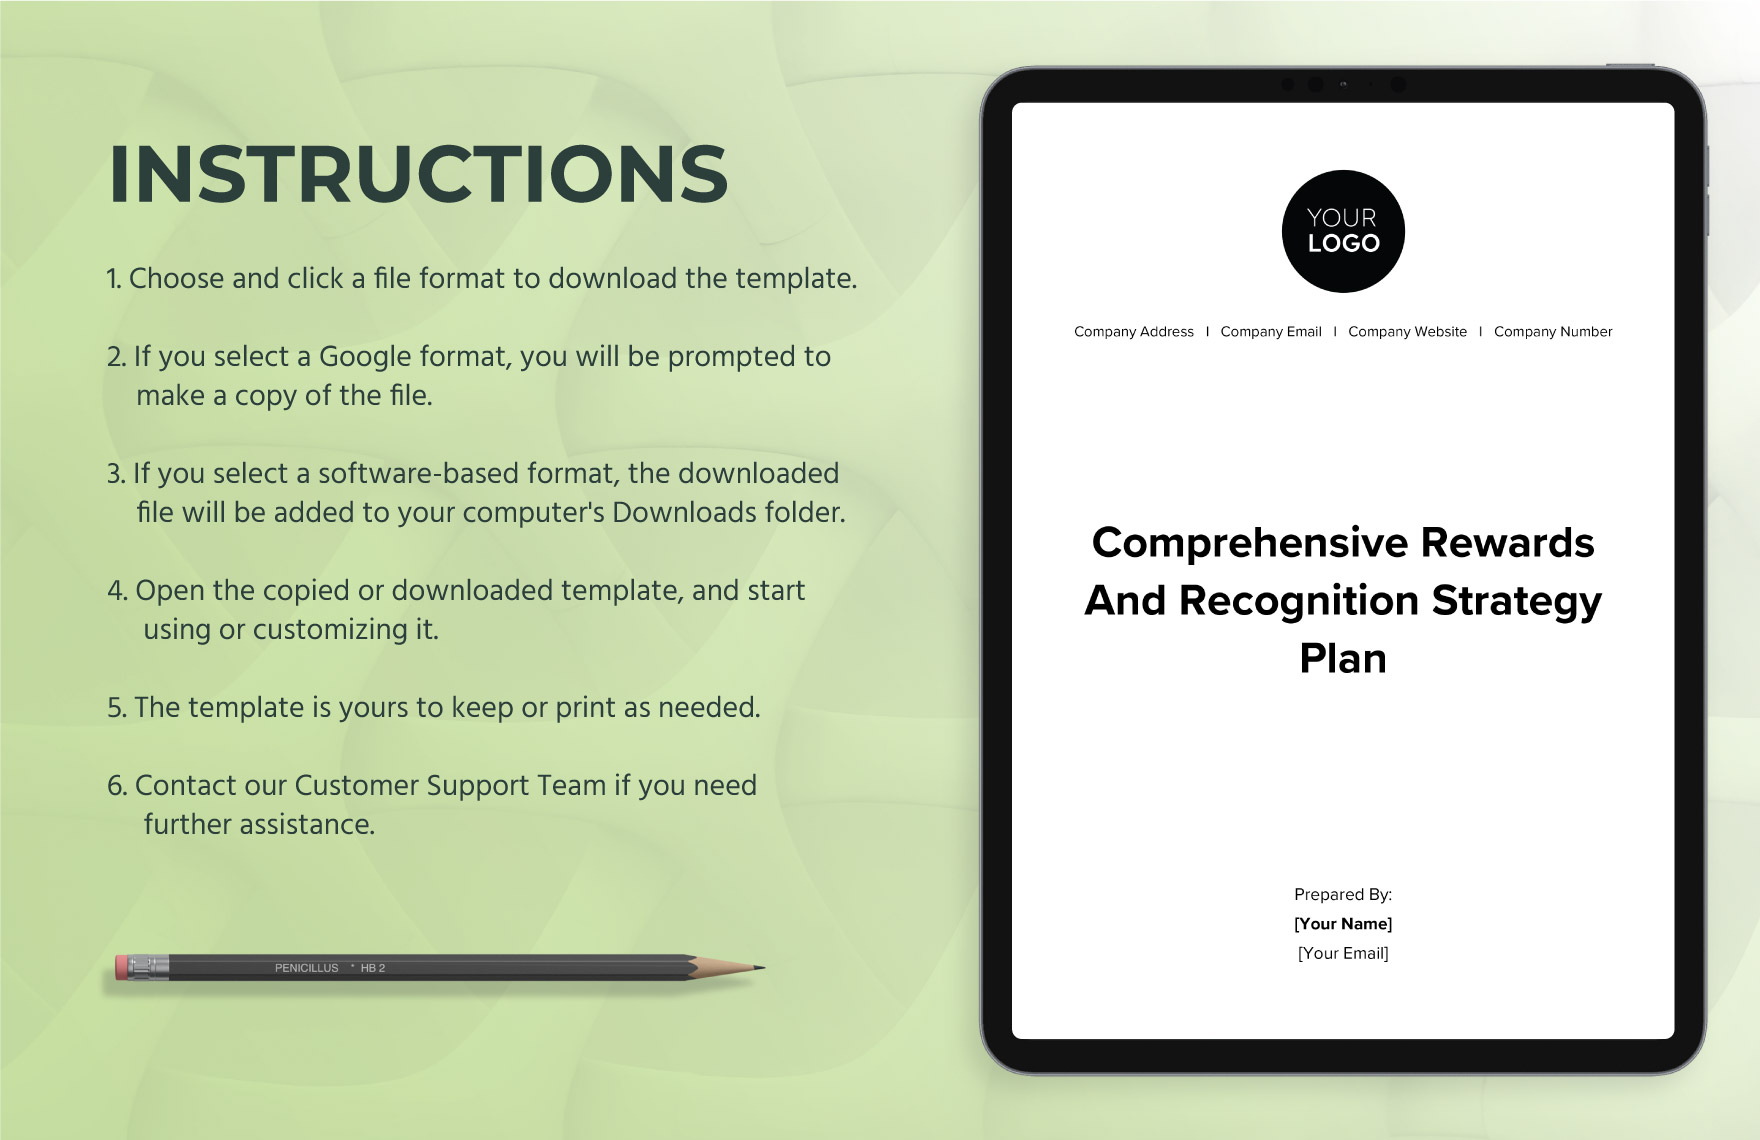 Comprehensive Rewards and Recognition Strategy Plan HR Template